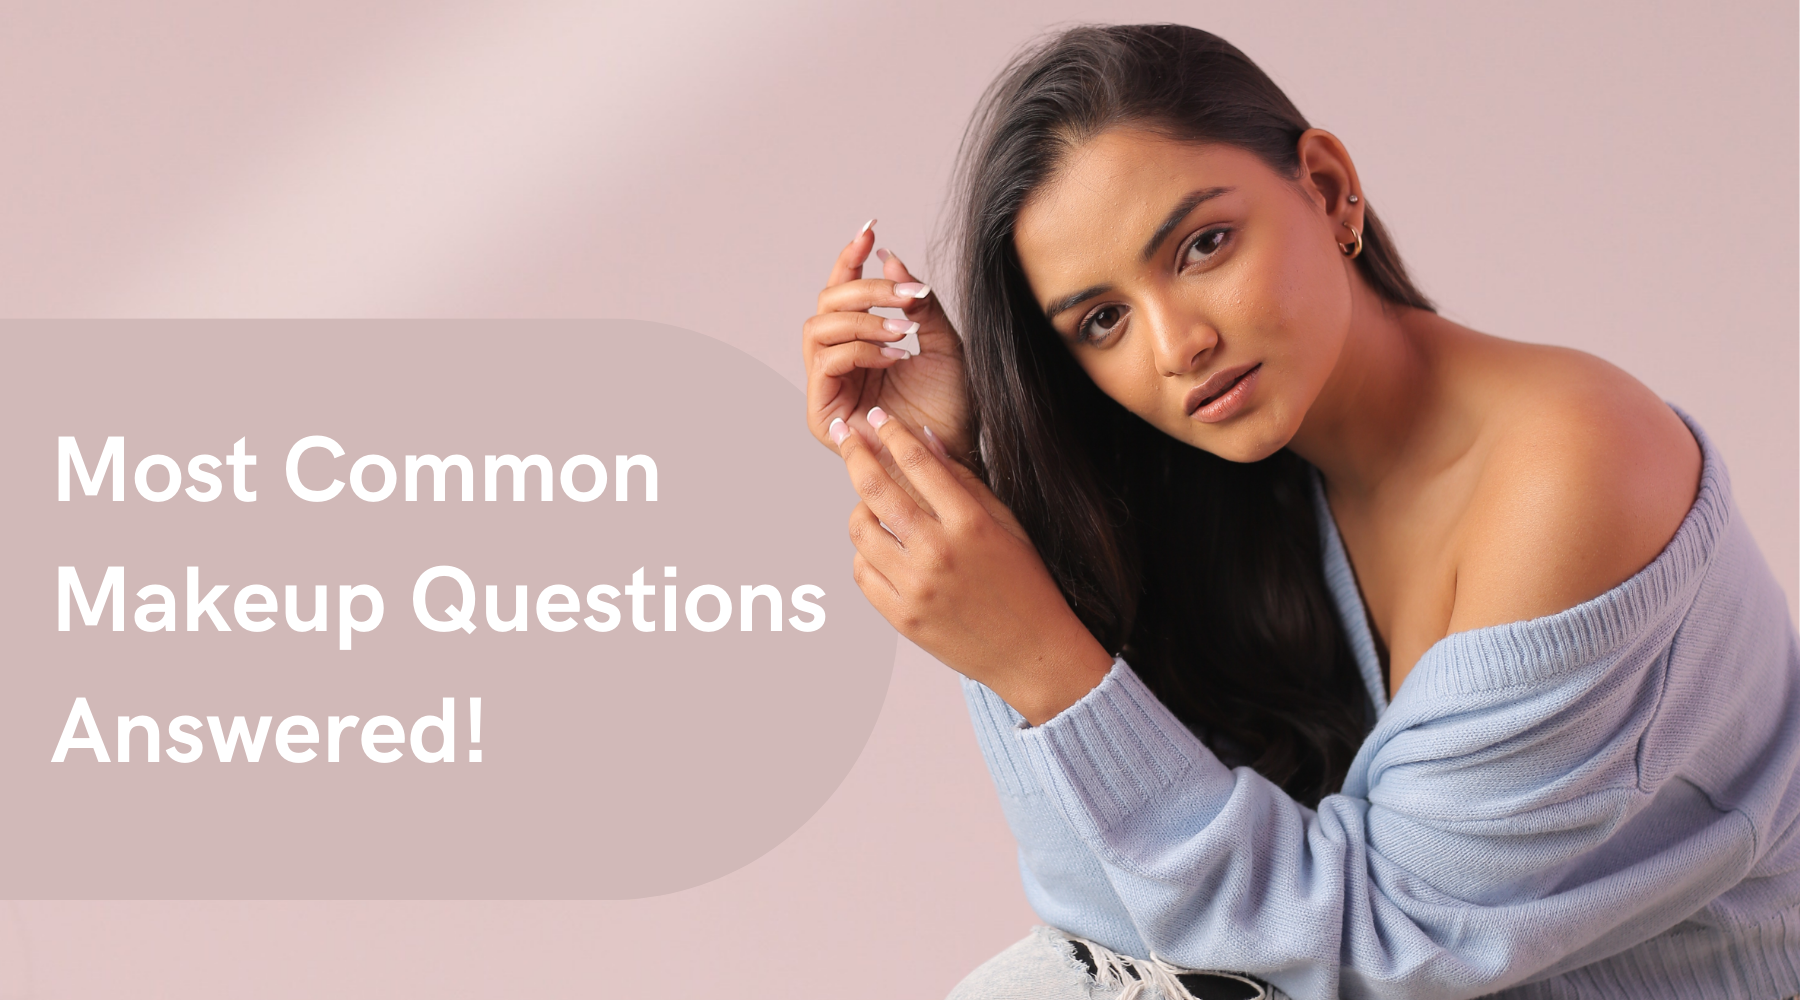 Most Common Makeup Questions Answered!